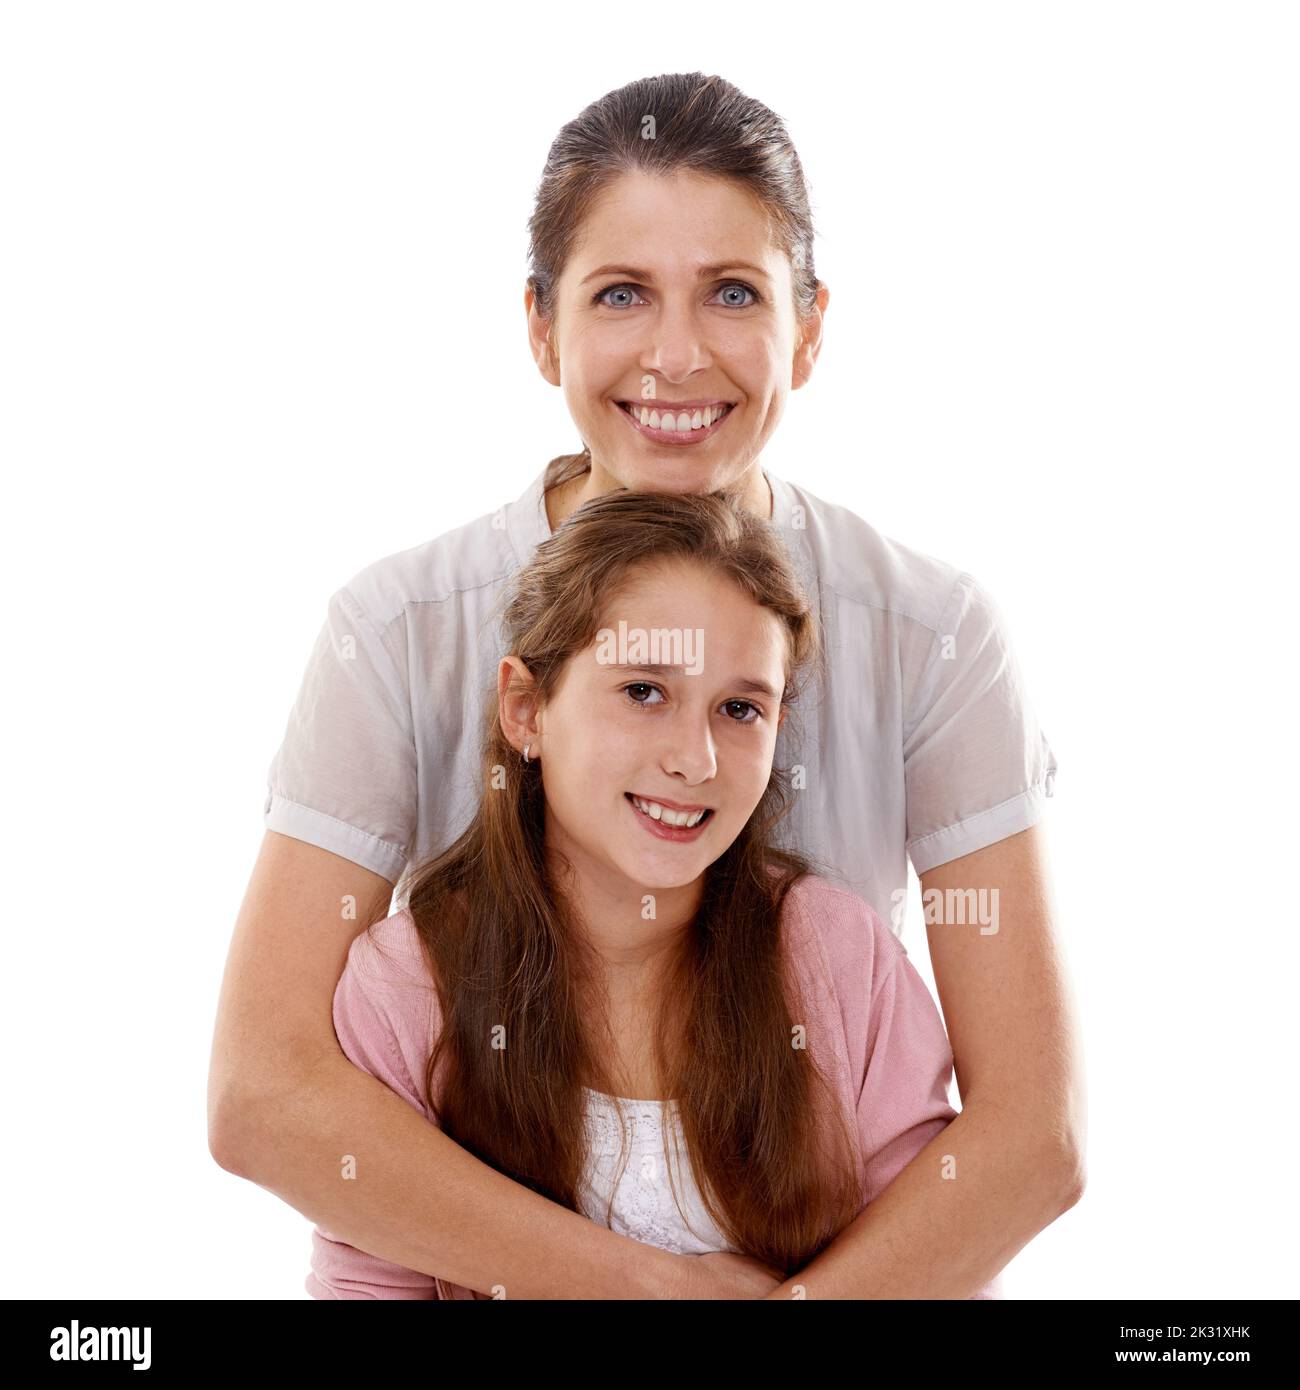 Im lucky to have such a beautiful daughter. Portrait of a mother embracing her daughter from behind. Stock Photo